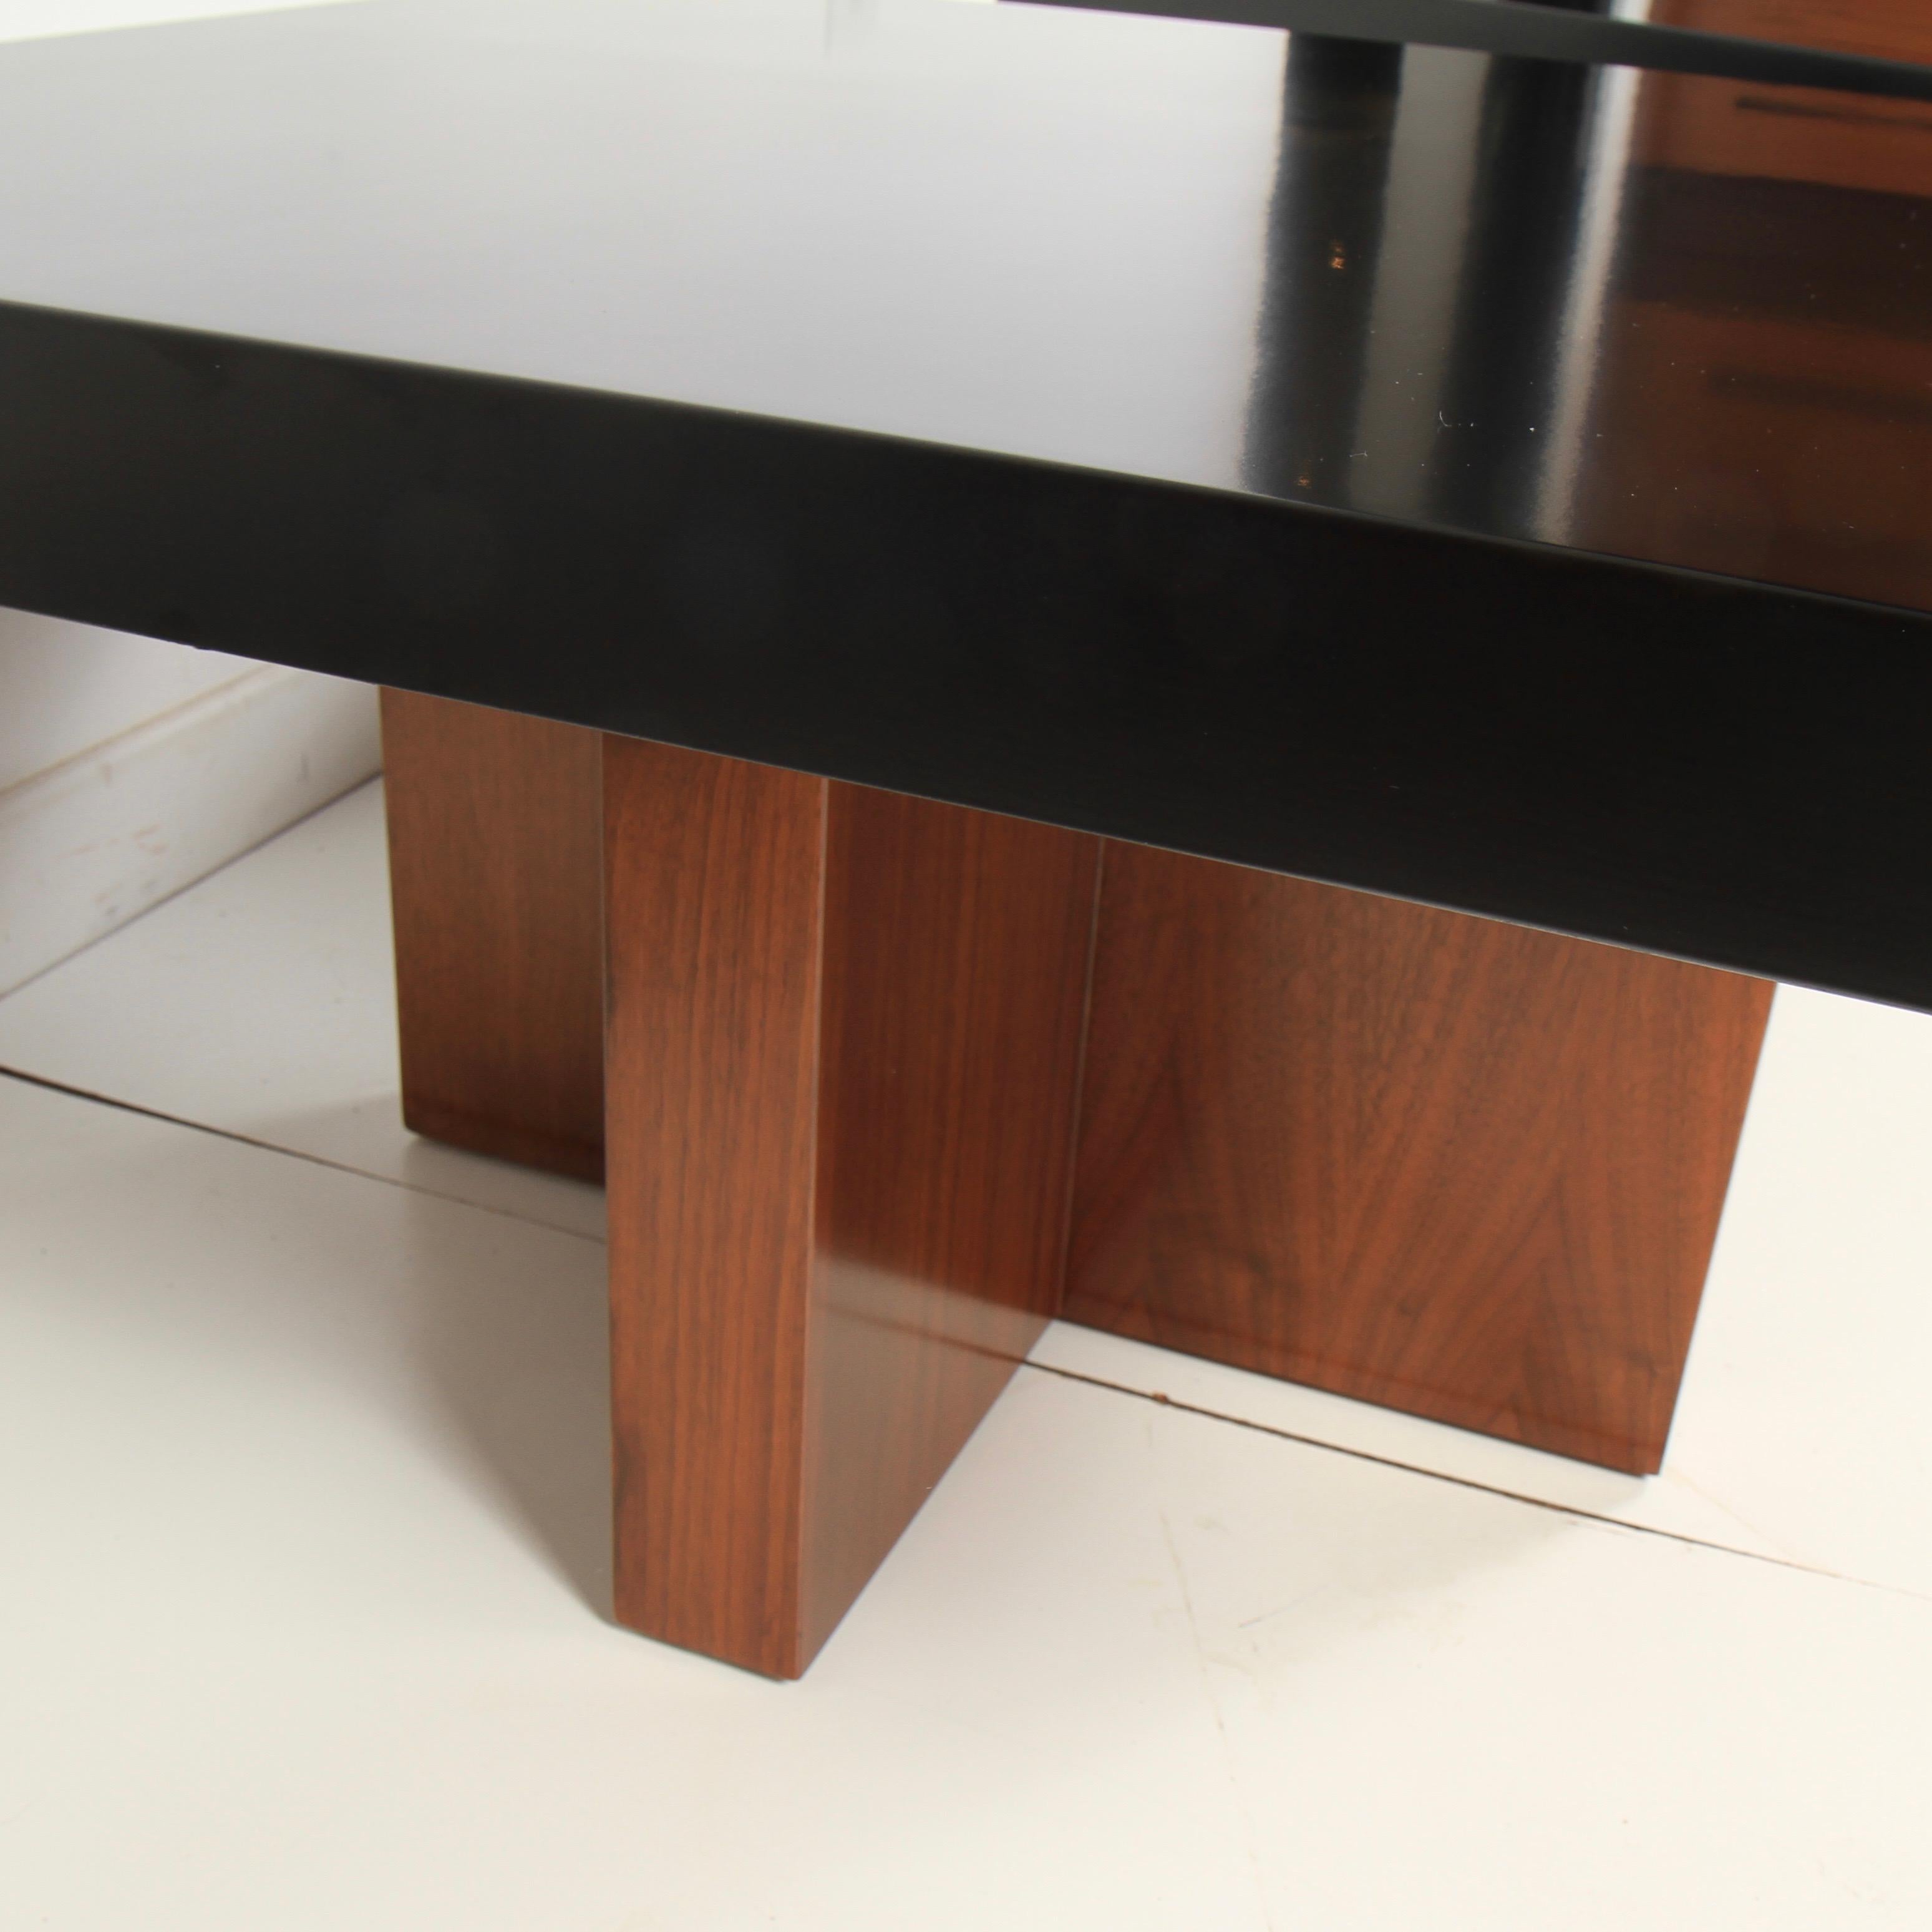 Mid-20th Century Milo Baughman Lacquered Walnut End Tables by Thayer Coggin For Sale